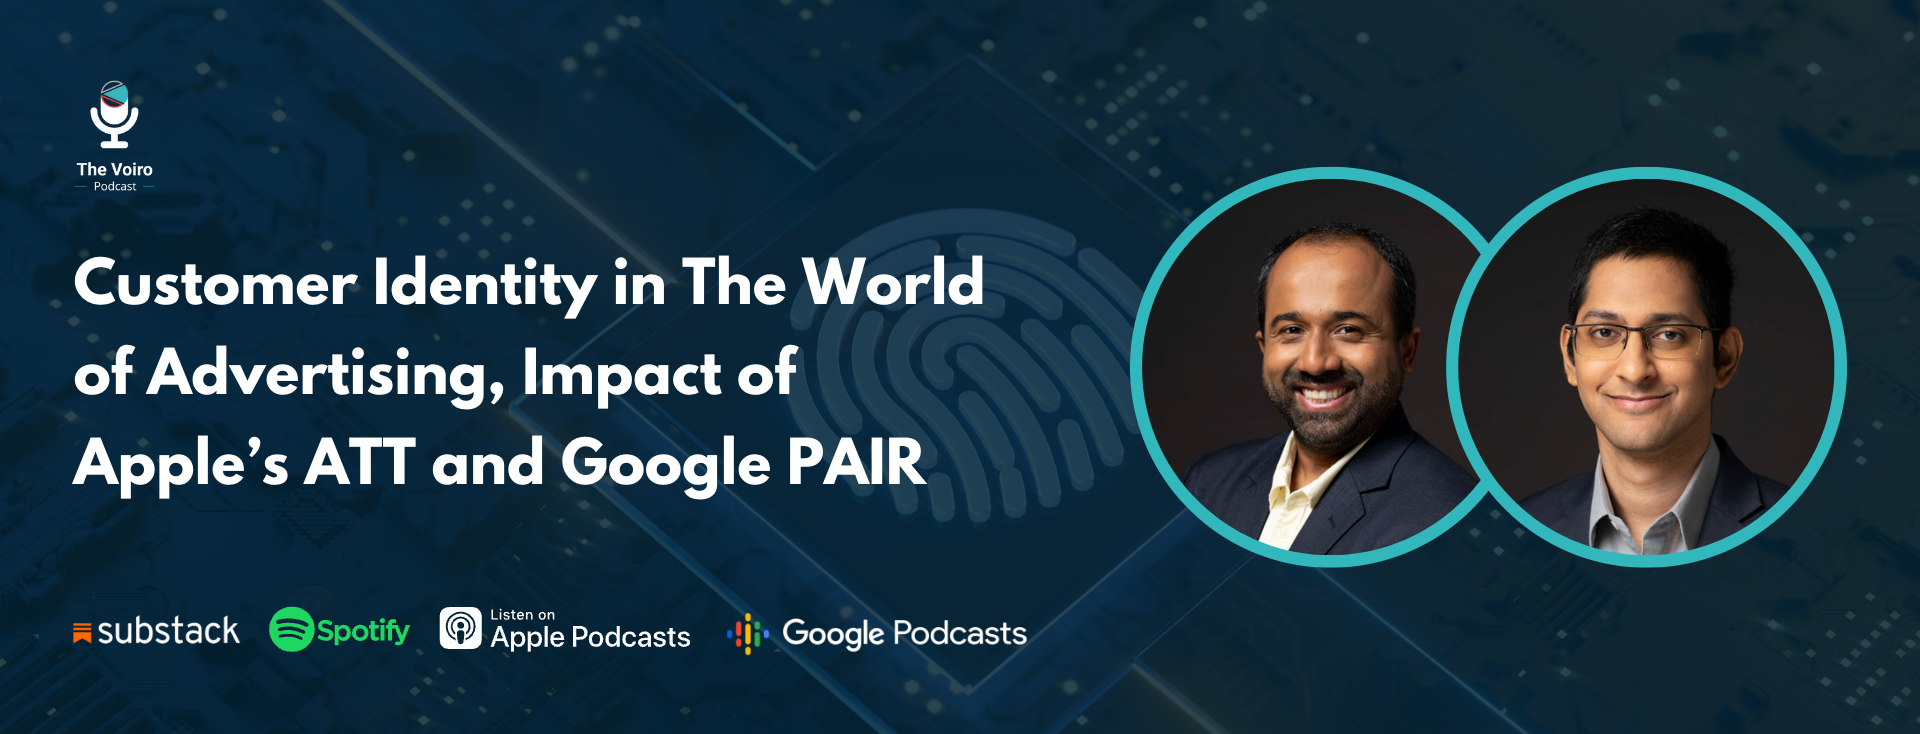 Customer Identity In The World of Advertising, Impact of Apple’s ATT and Google PAIR - The Voiro Podcast